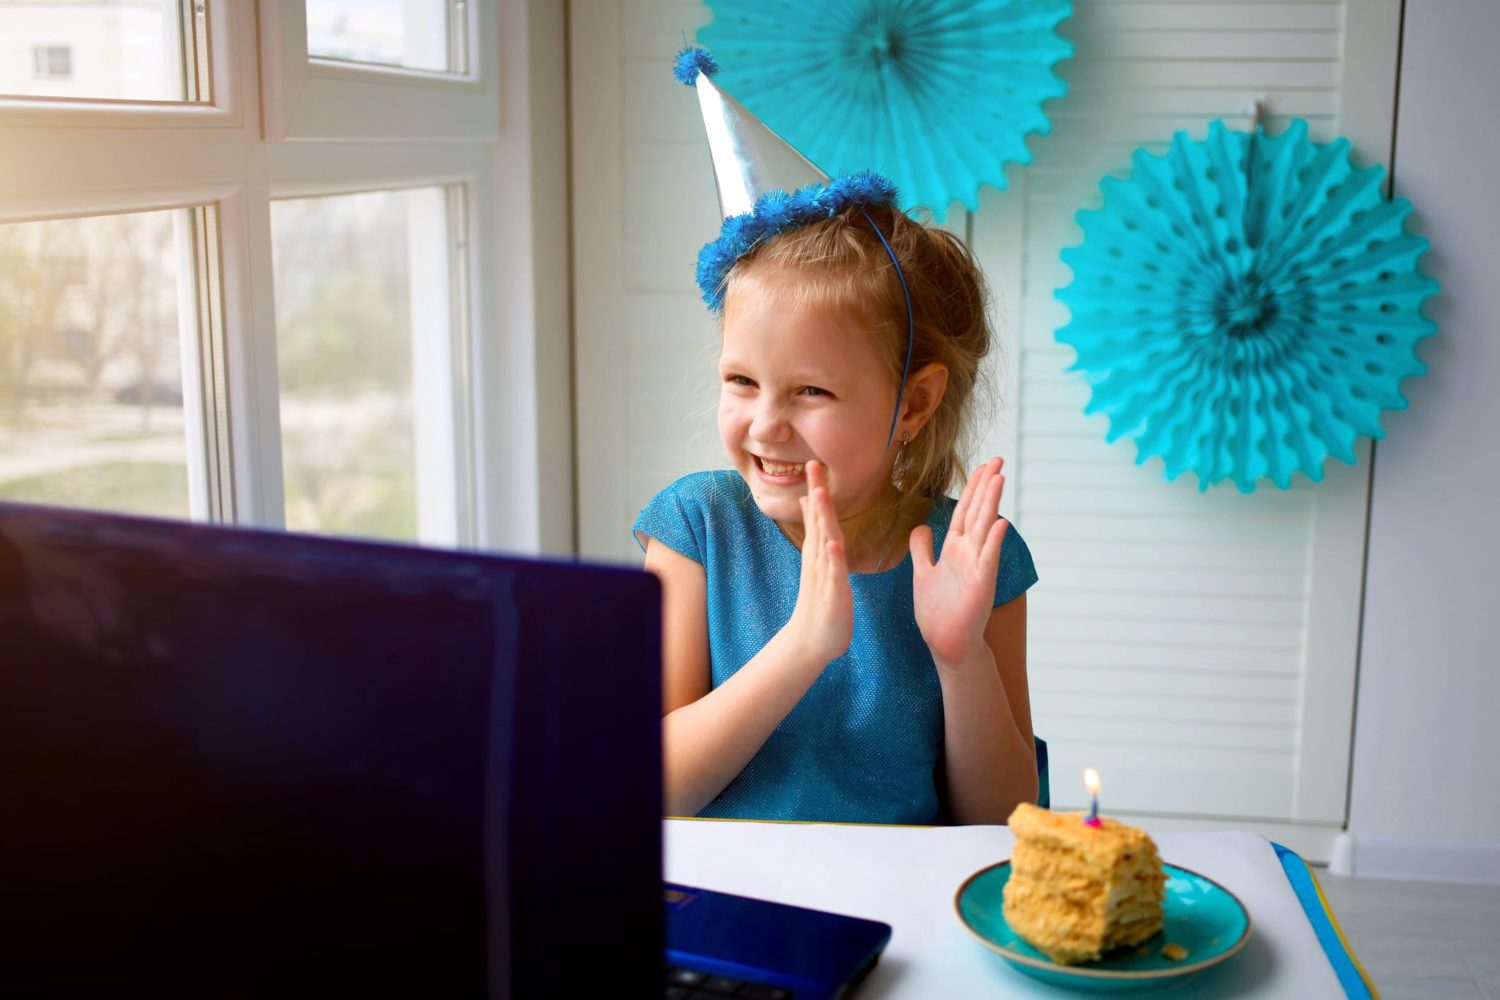 child wearing a party hat and clapping while looking at a computer screen - she has a piece of cake with a birthday candle next to her